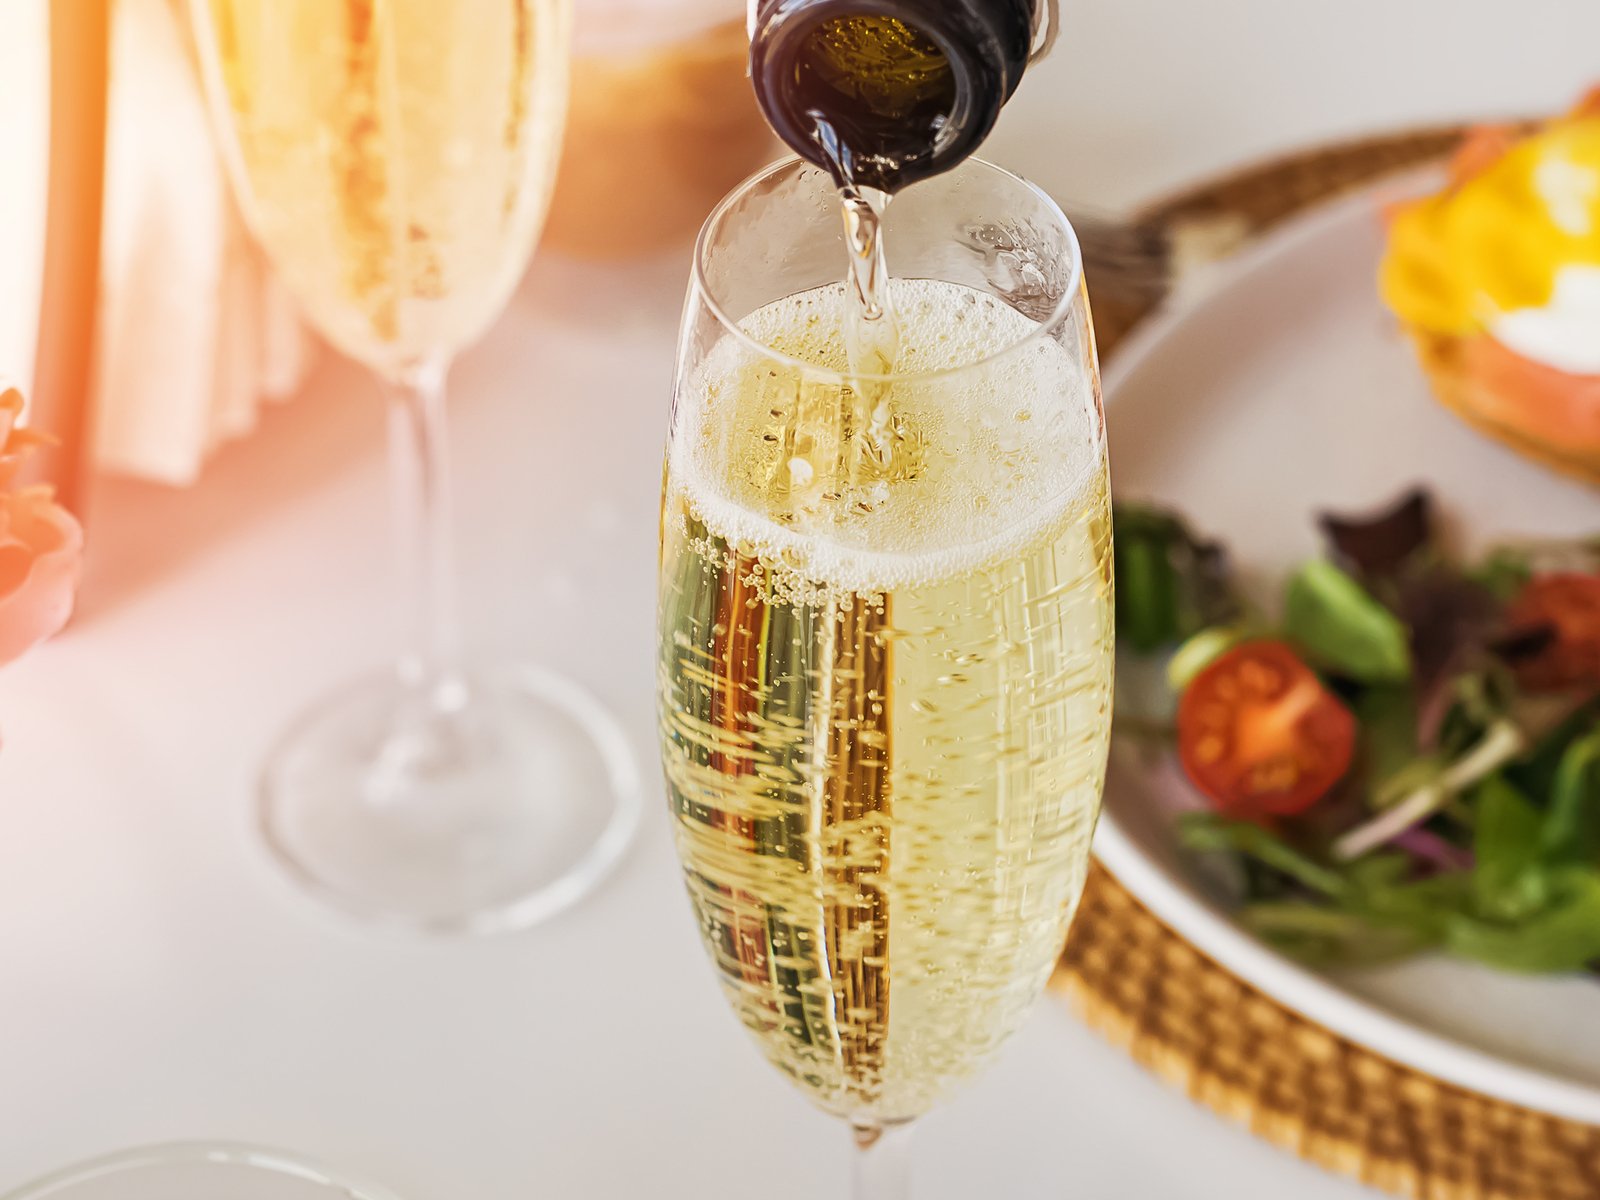 Prosecco is the world's best-selling sparkling wine&nbsp;